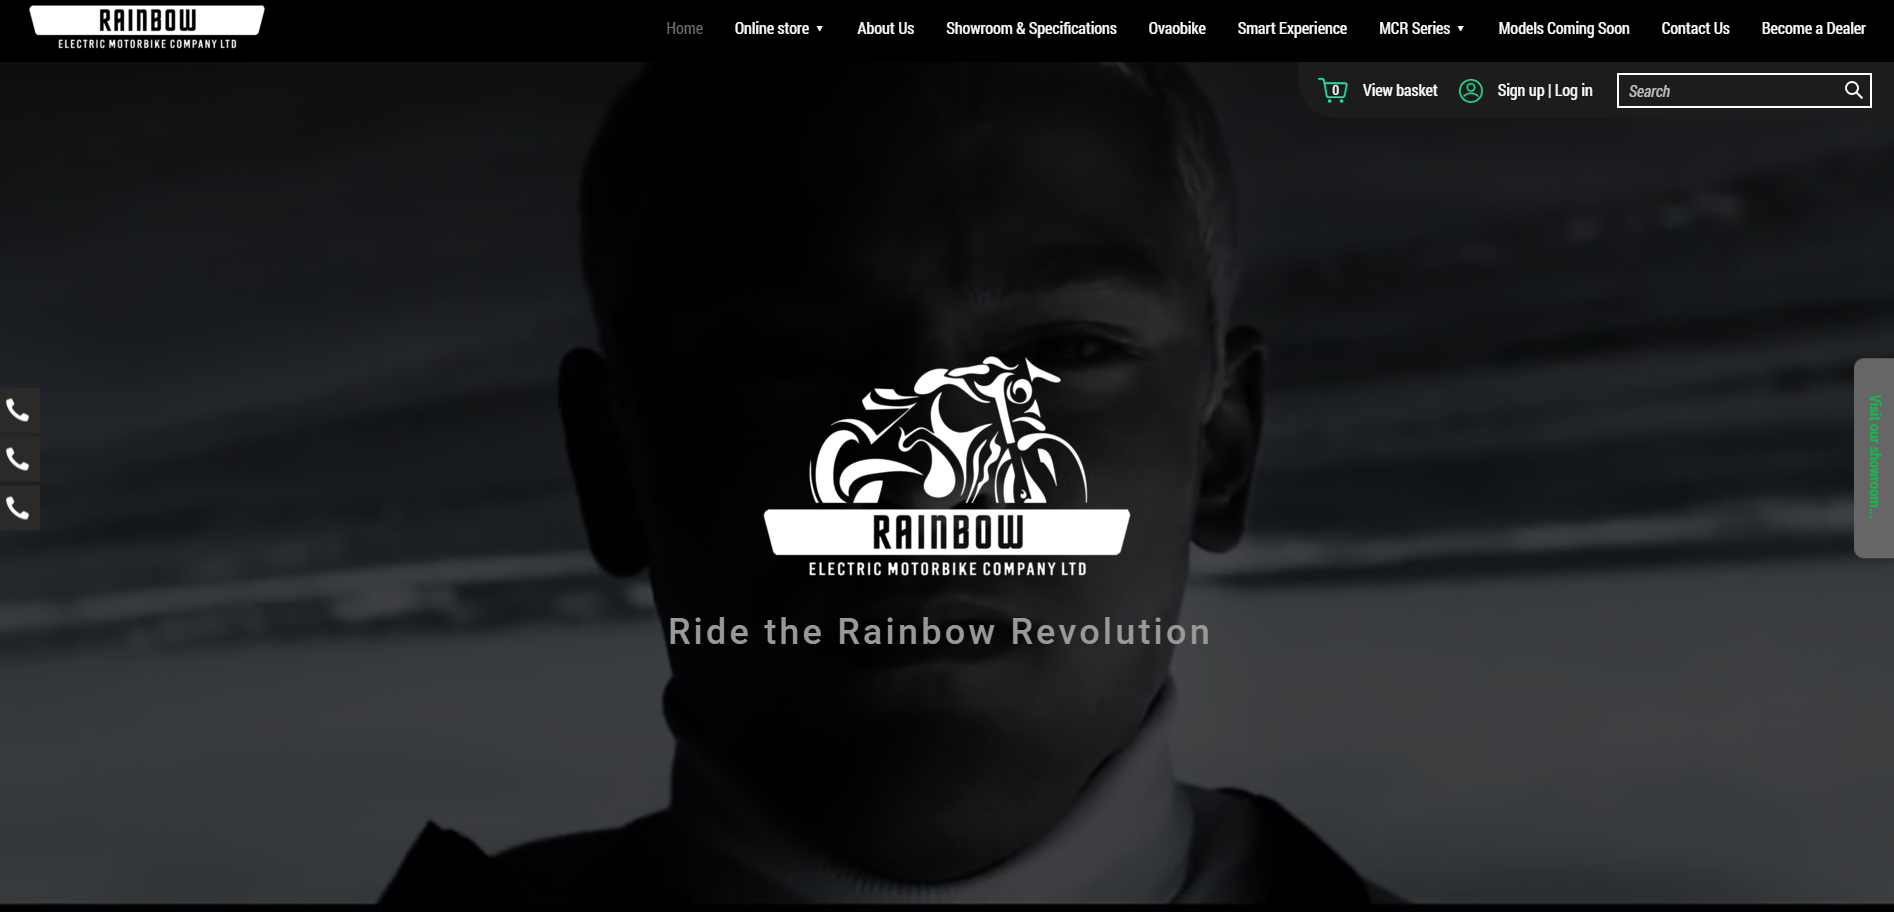 A website design for an electric motorbike company